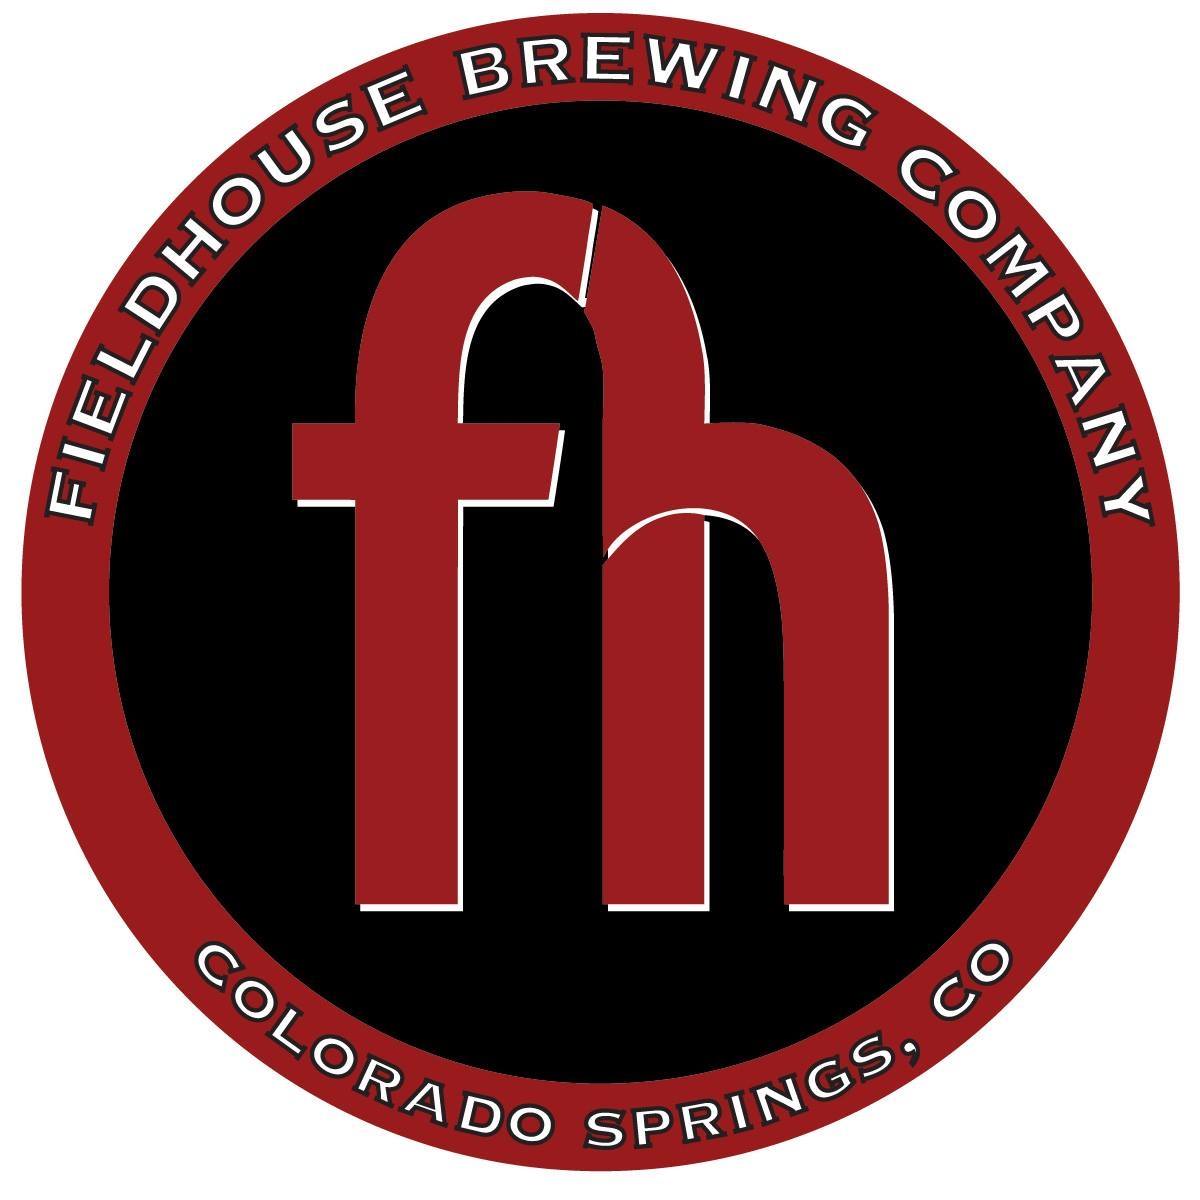 Image result for Field House brewery colorado springs